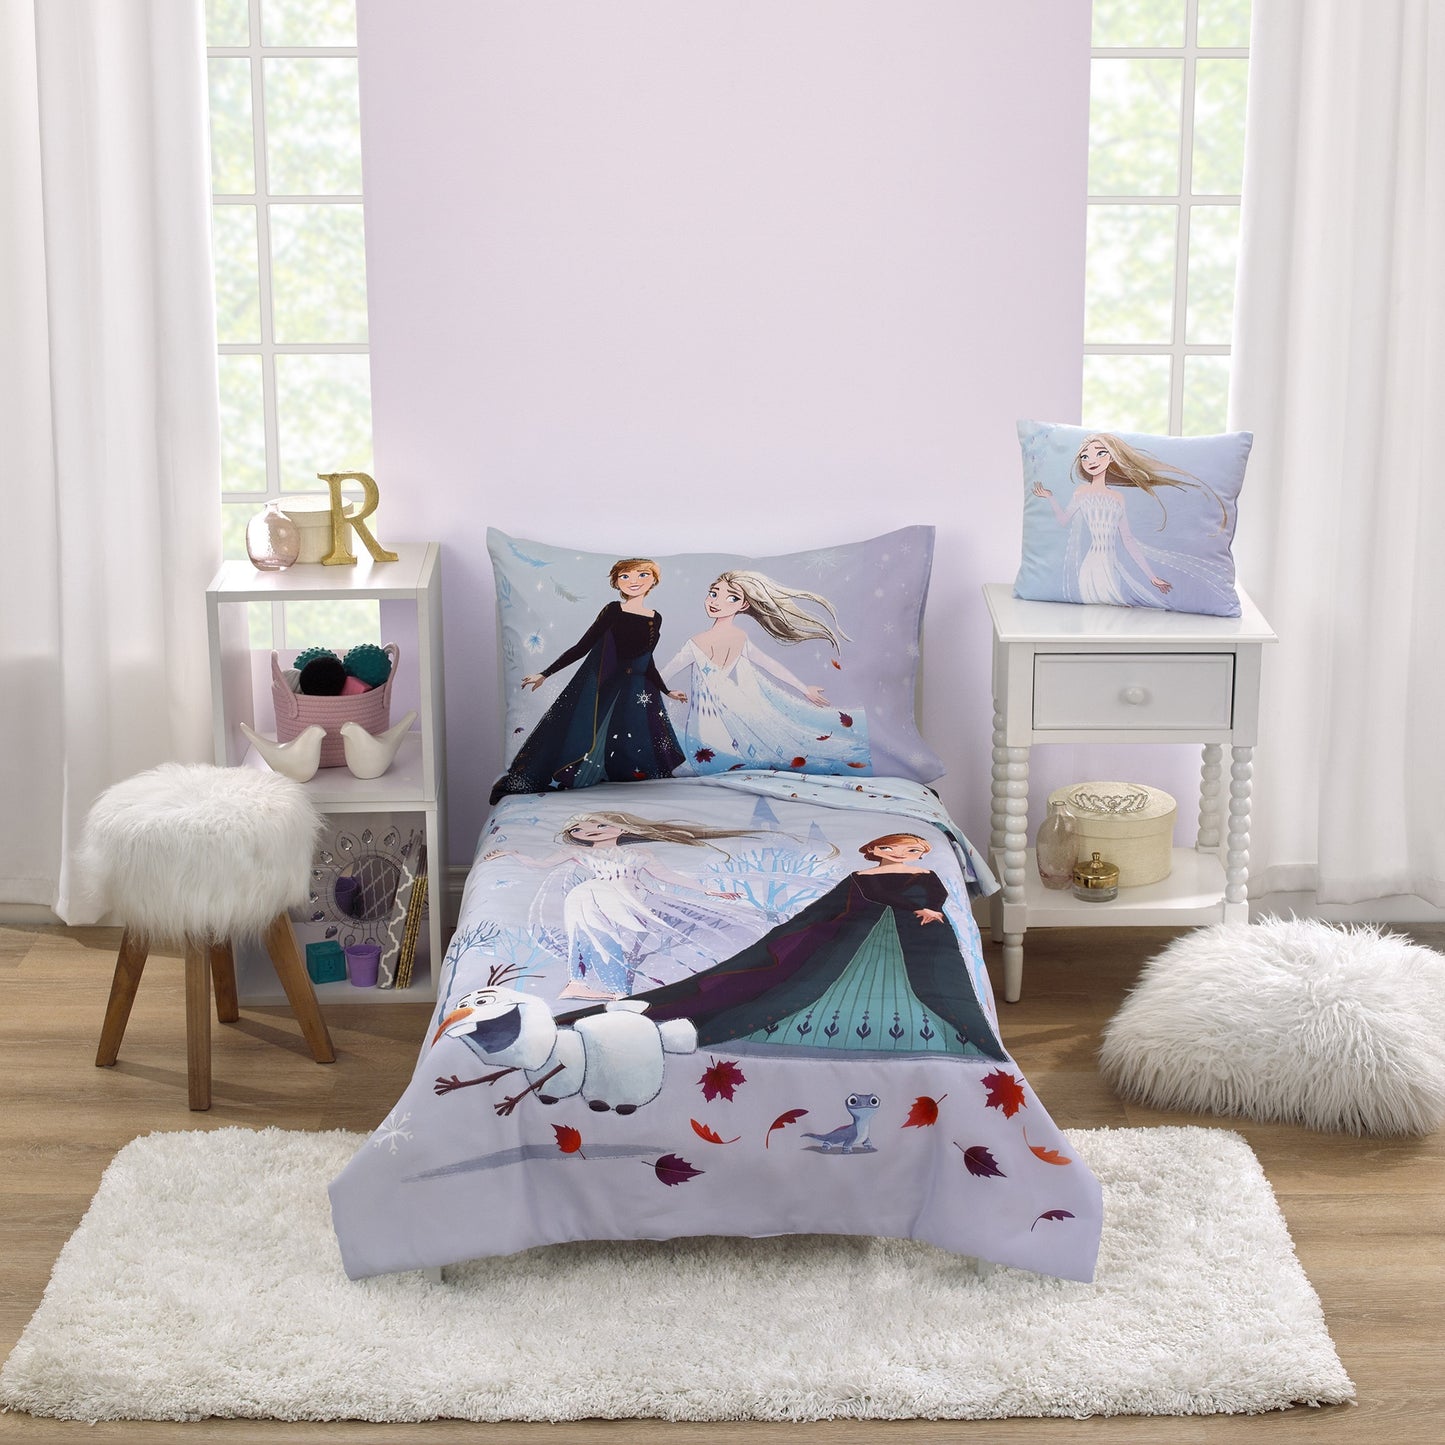 Disney Frozen Winter Cheer Lavender, Aqua, Green and White, Anna, Elsa and Olaf Toddler Blanket